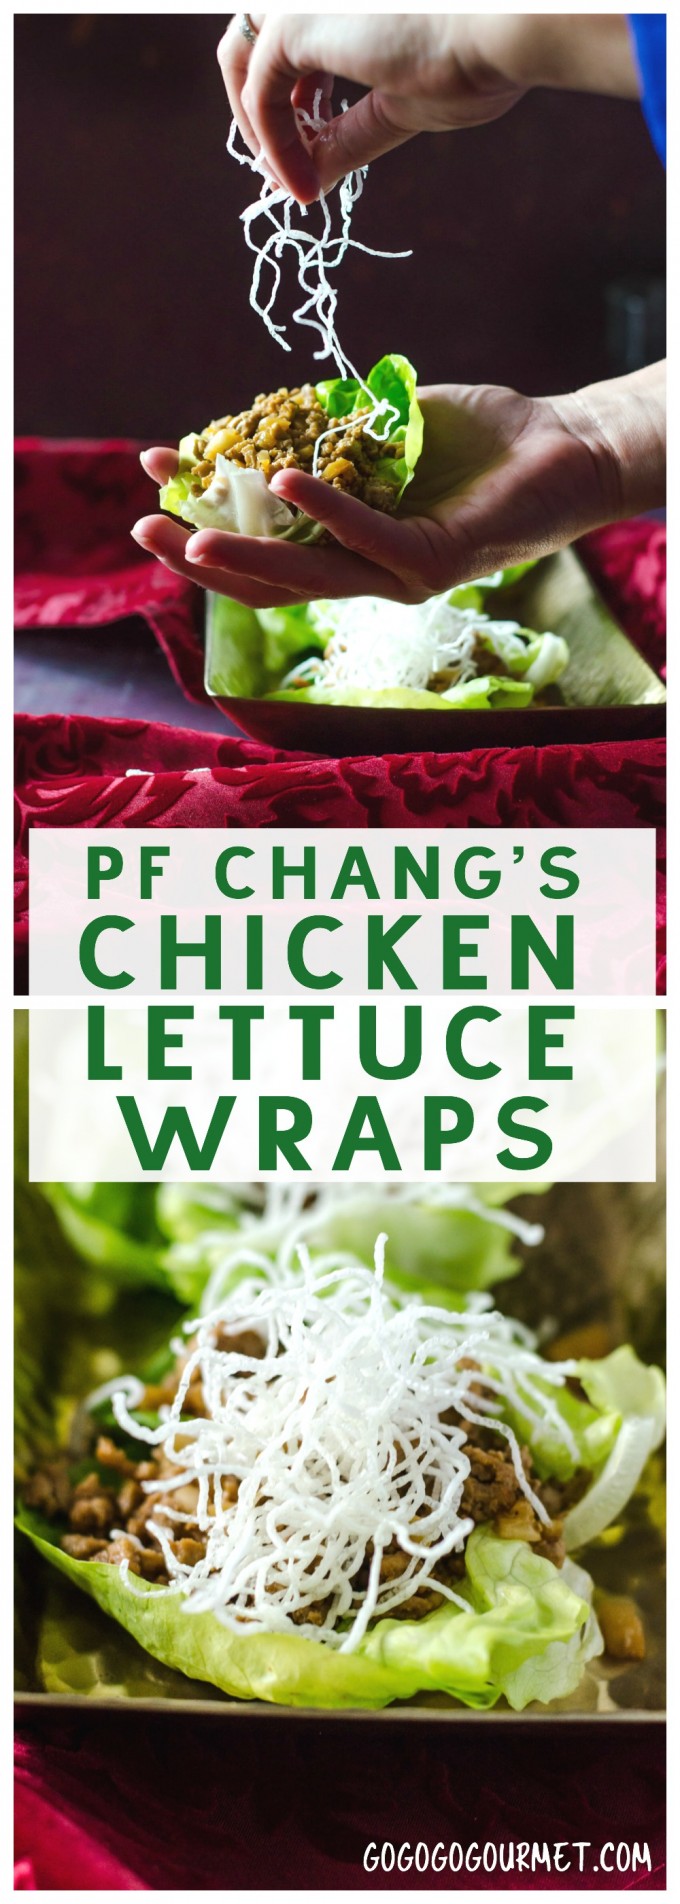 These Chicken Lettuce Wraps are the best PF Chang's copycat! They are so simple to make and are perfect for serving up as an appetizer! #gogogogourmet #chickenlettucewraps #pfchangslettucewraps via @gogogogourmet